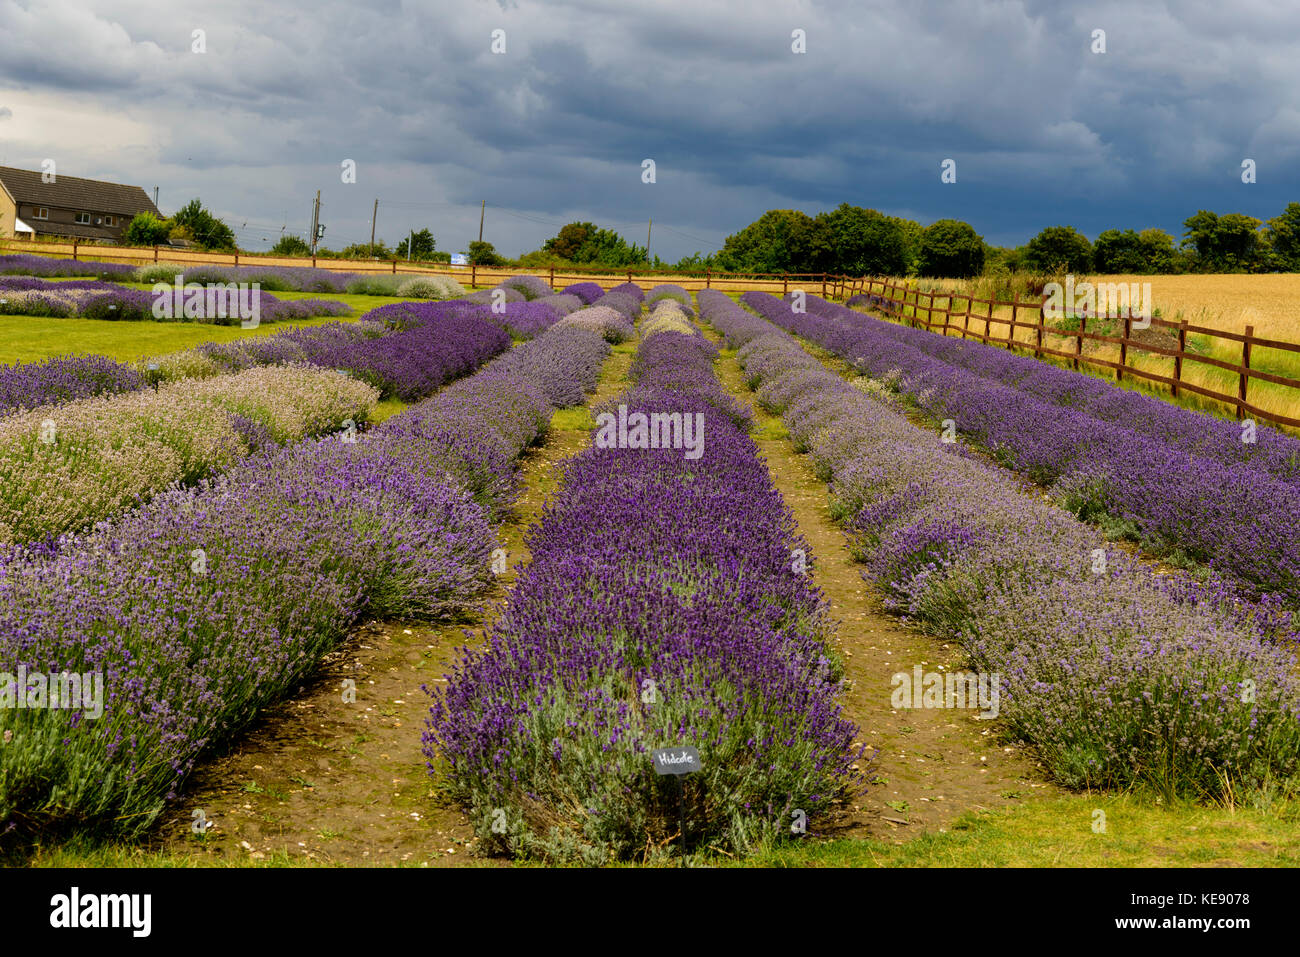 Lavender farm before the storm Stock Photo